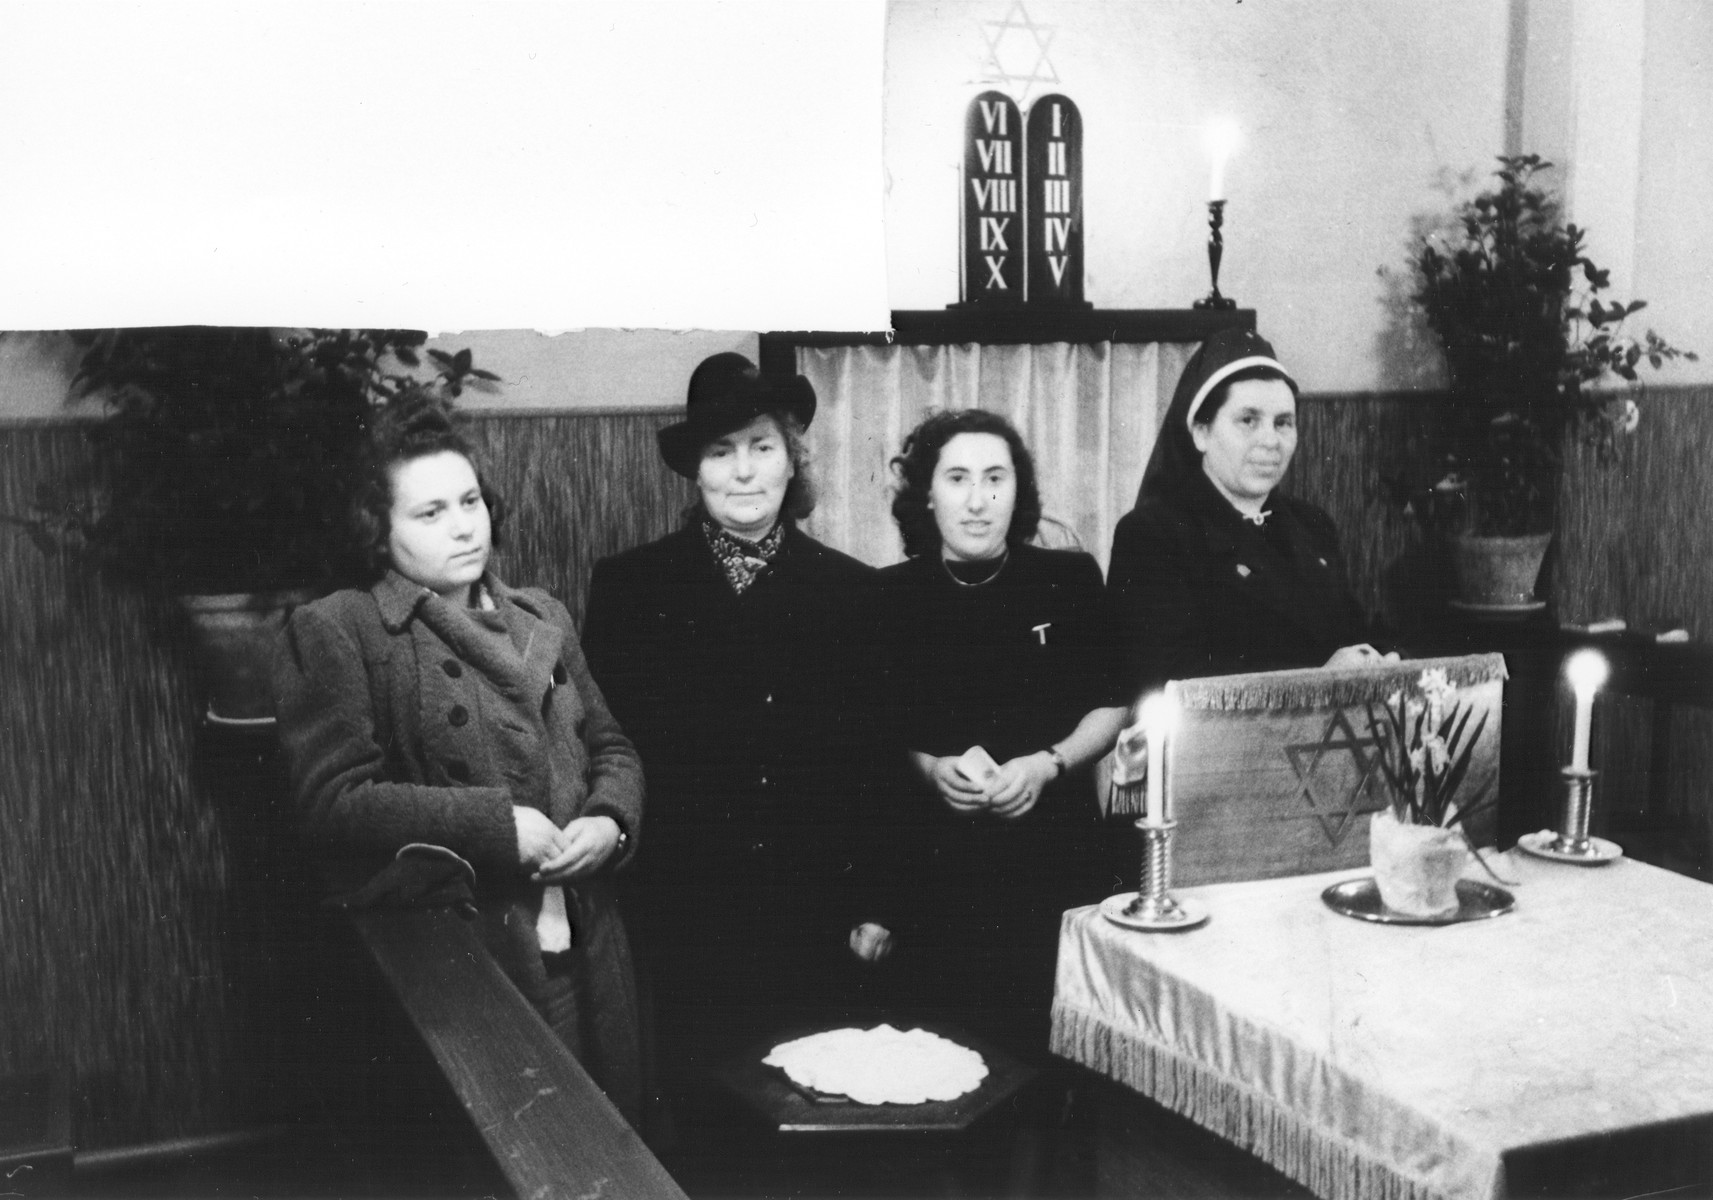 Four women sit in the chapel at U.S. Army 3rd Division headquarters in Bad Wildungen.

Pictured (left to right) are Erika Mannheimer, her mother Lina Mannheimer, Selma Hammerschlag, and Hilde Hammerschlag.  All are survivors from Bad Wildungen.